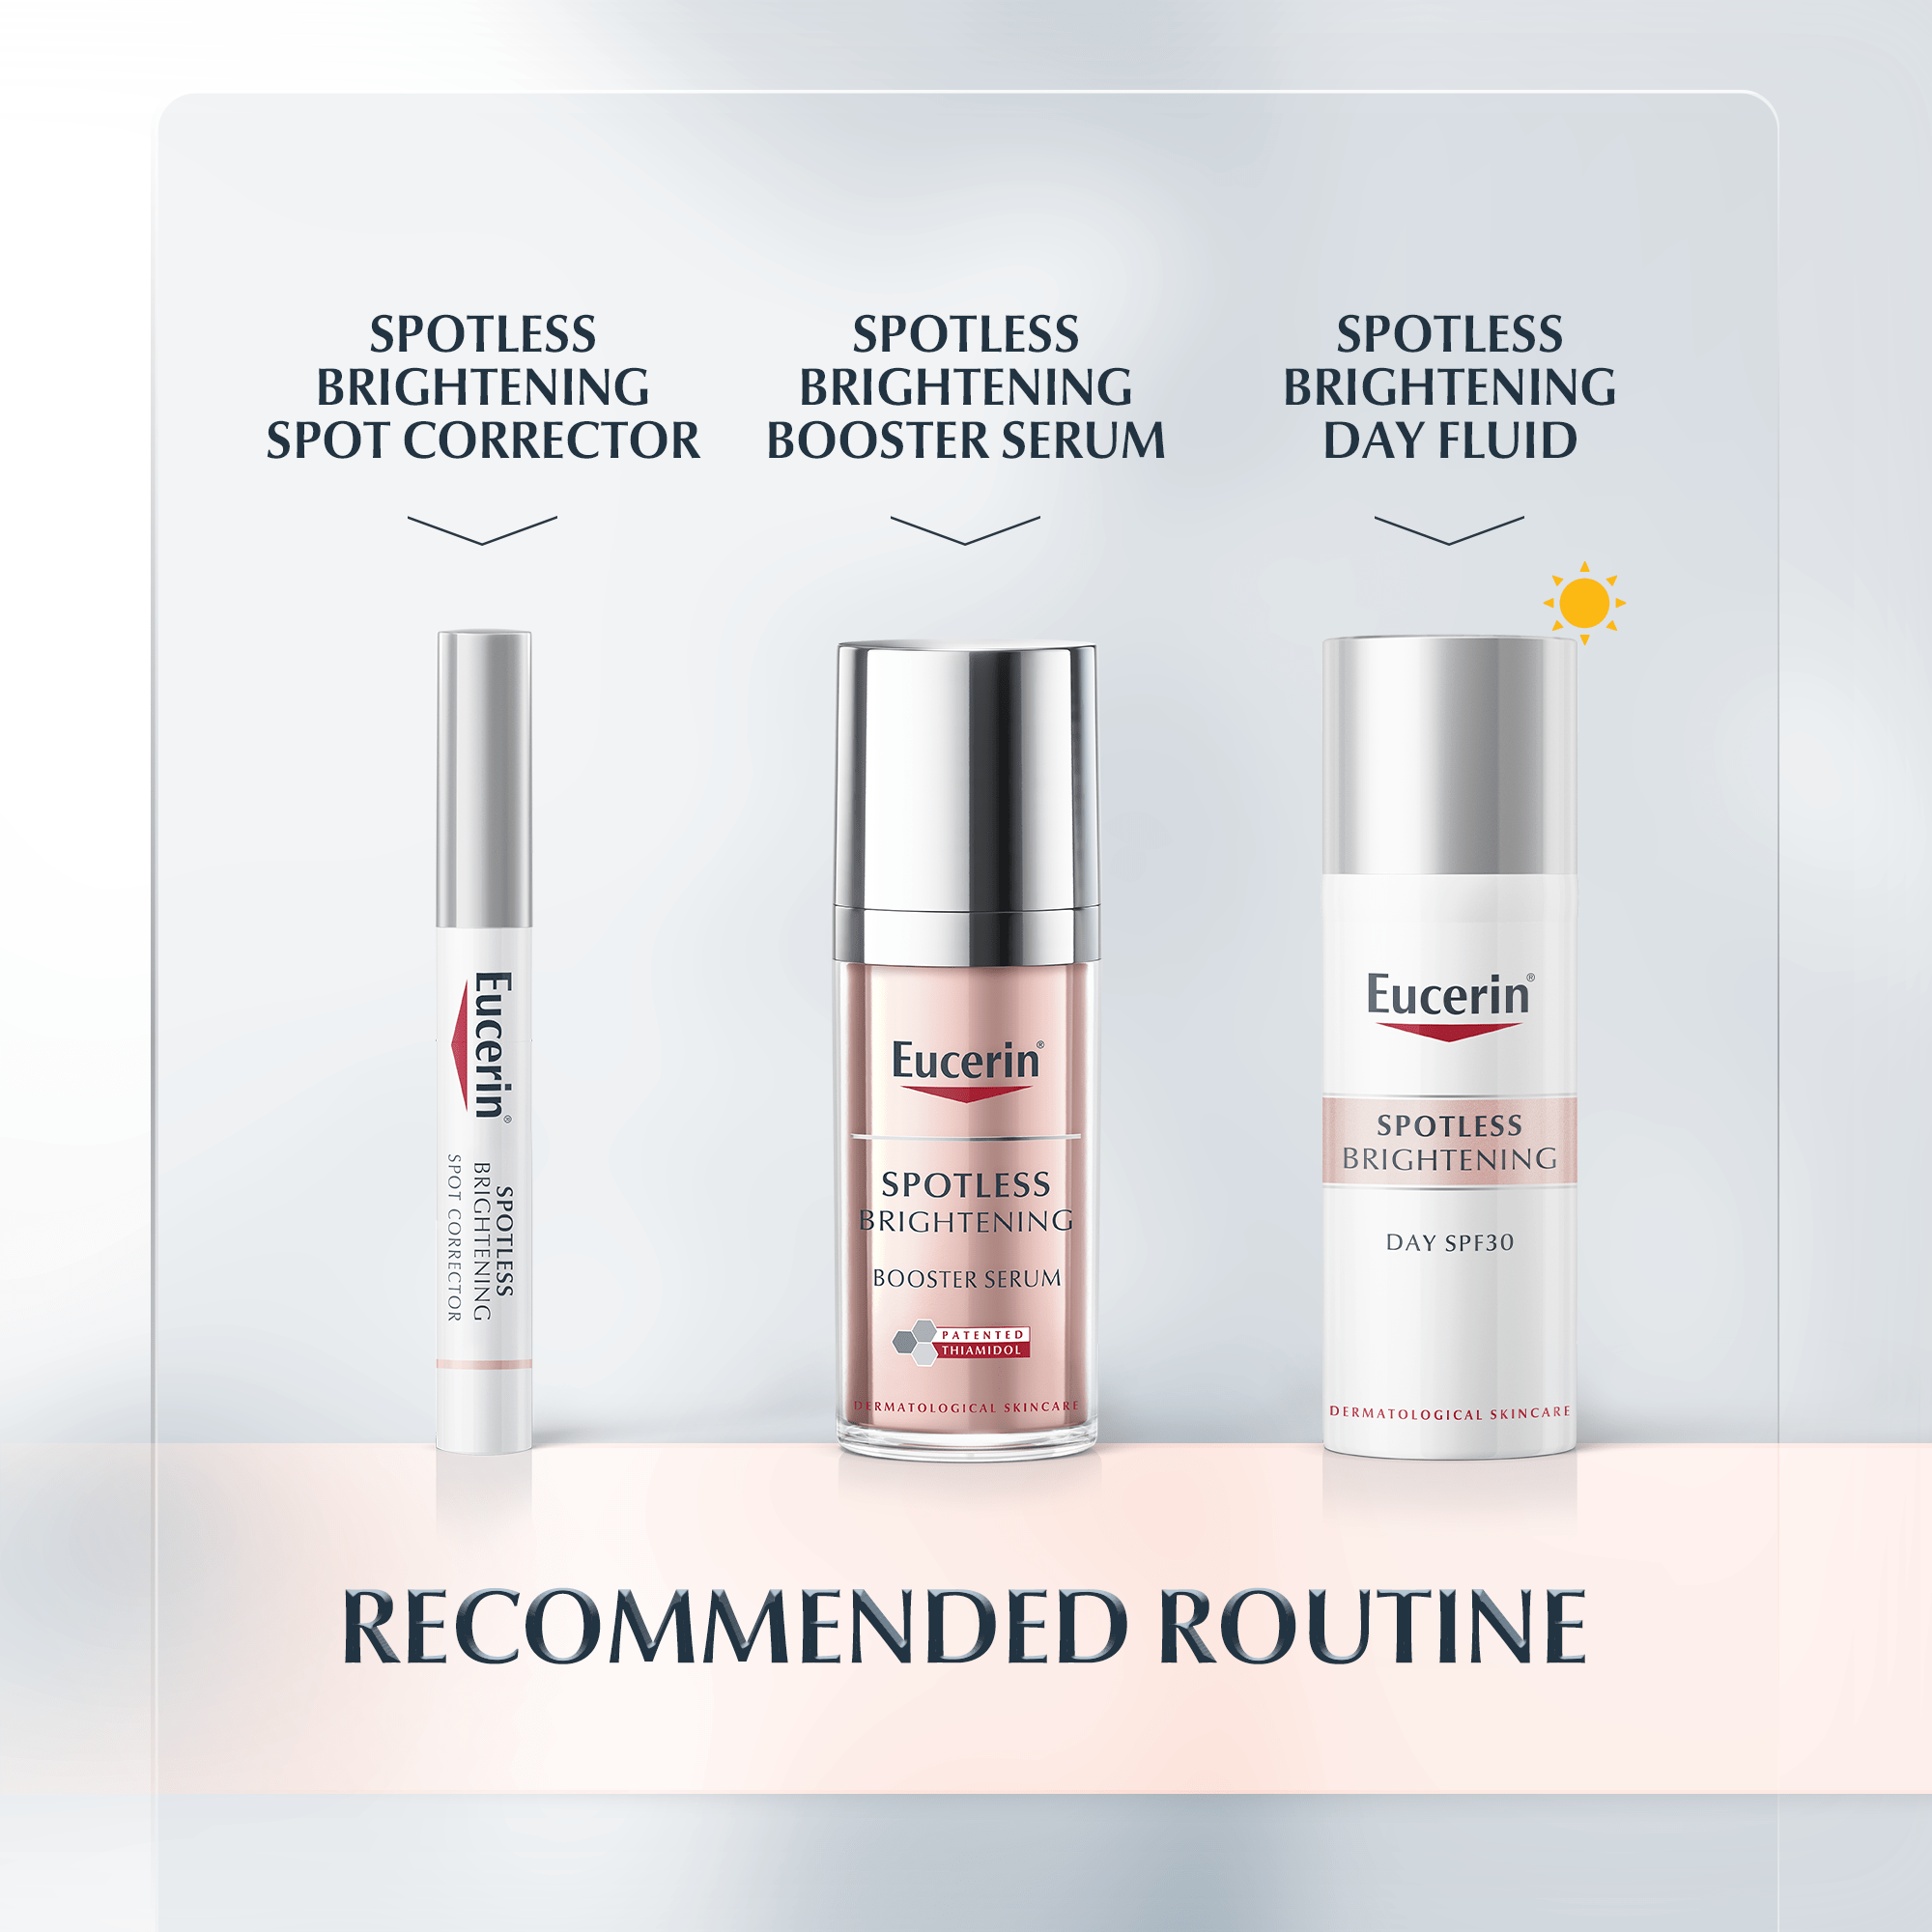 Recommended Routine of Ultrawhite Spotless Range